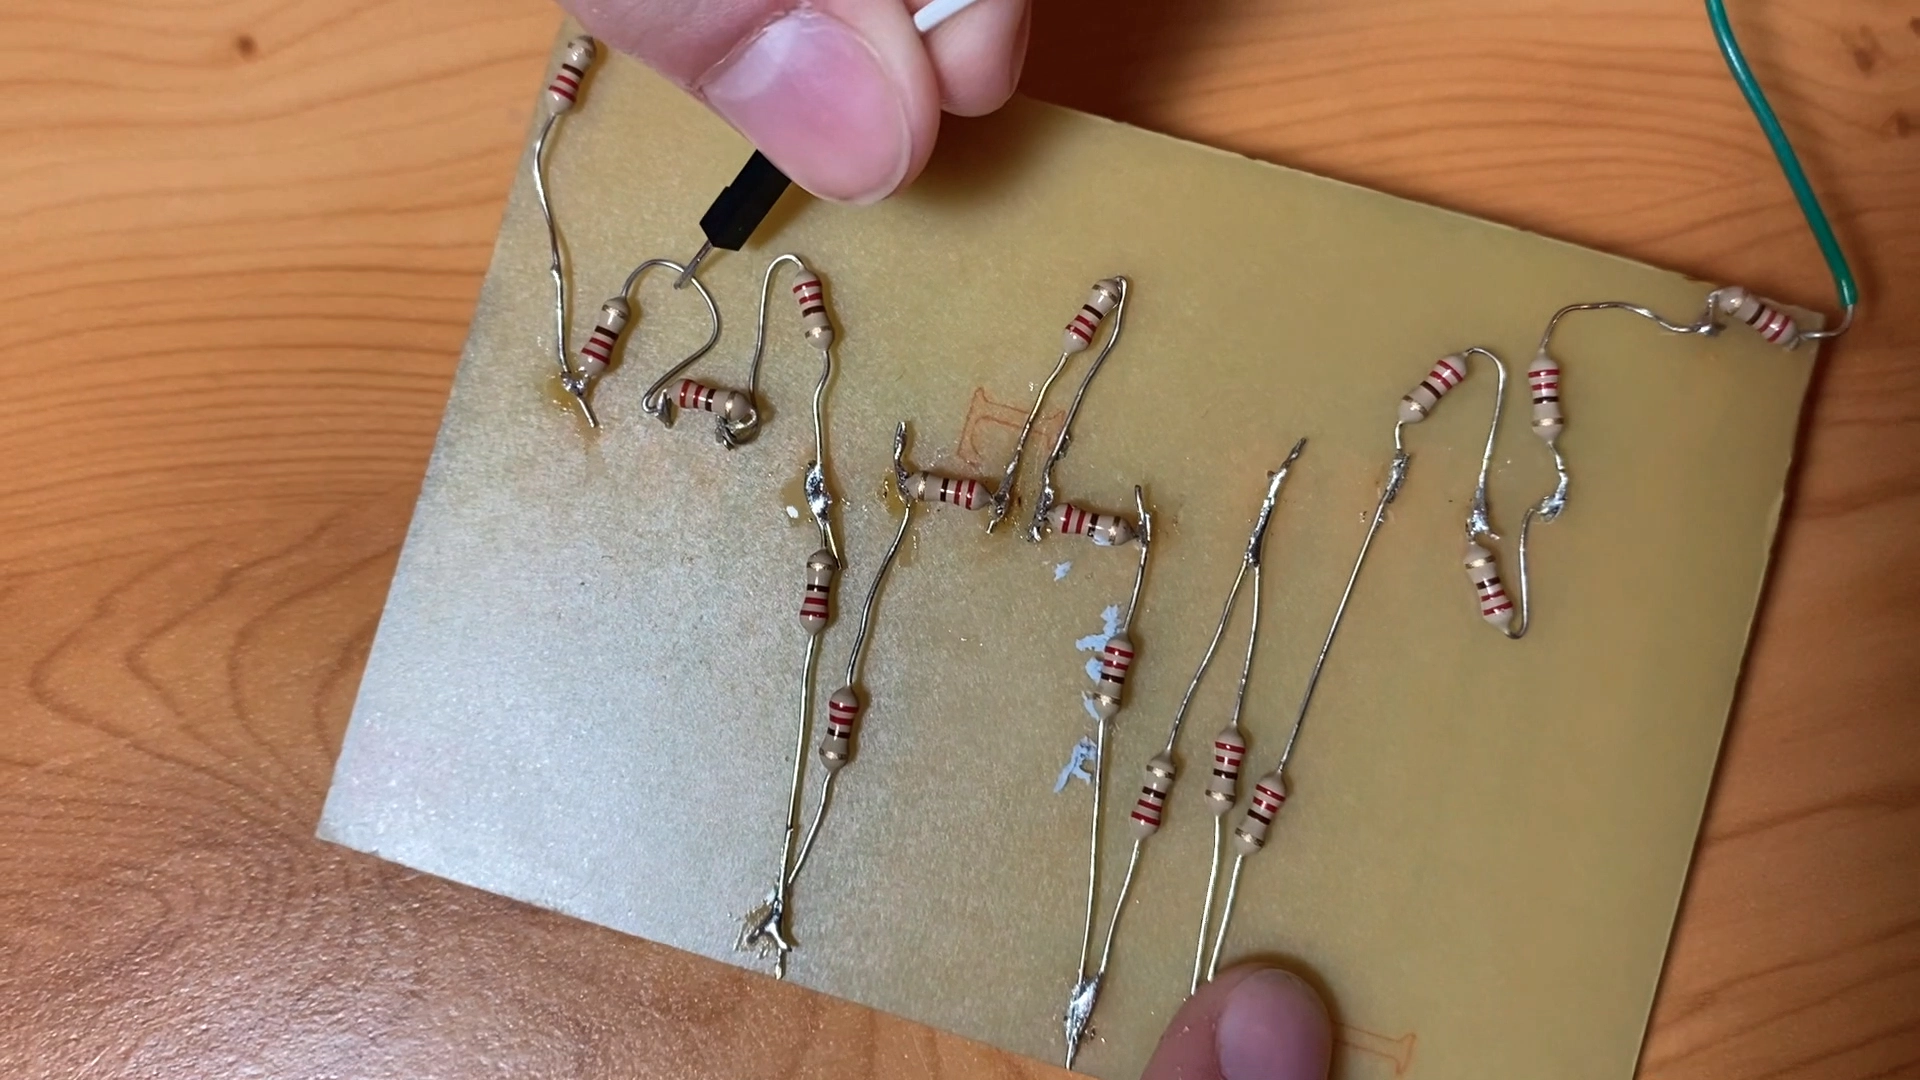 pico piano resistors connected to back of copper plate